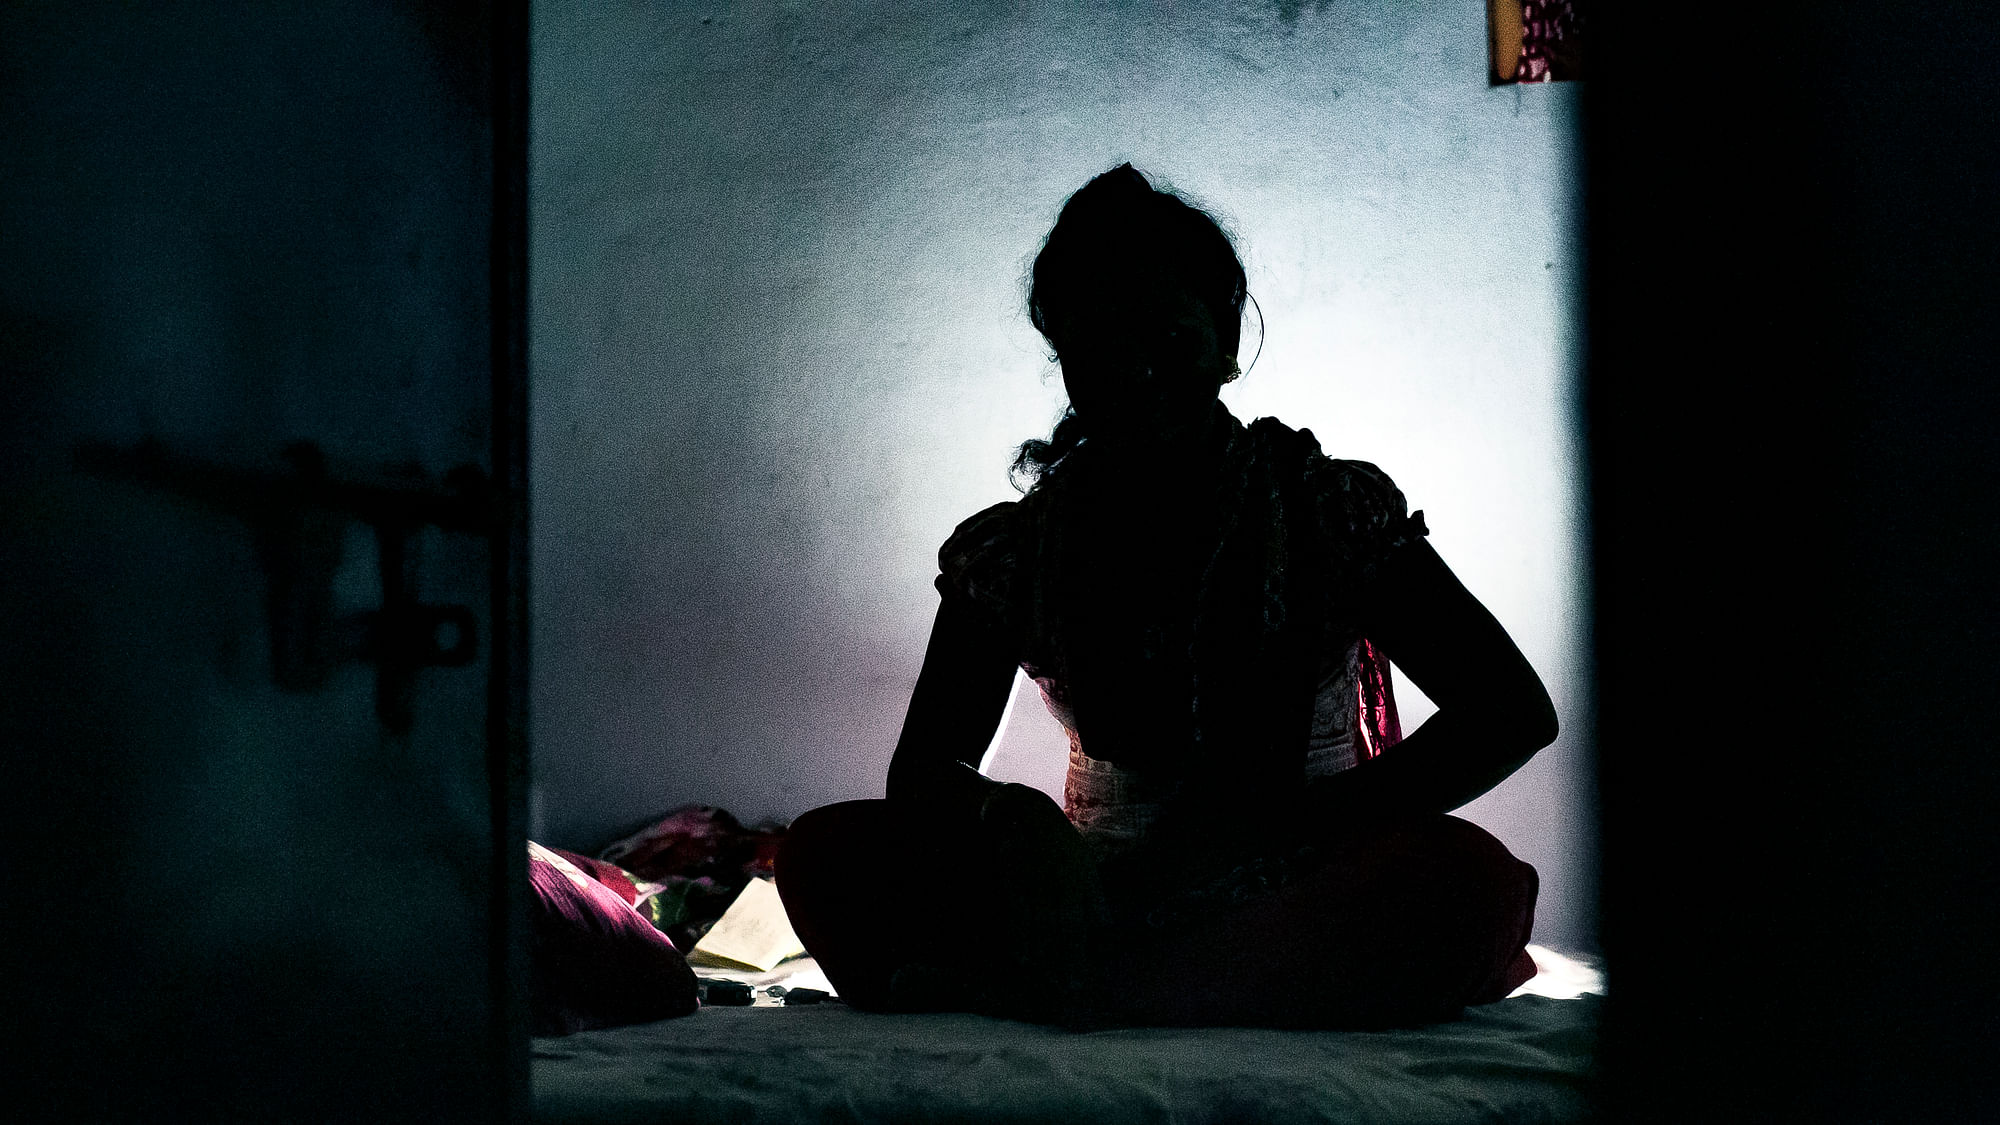 The conviction rate in cases involving sexual exploitation of children is abysmally low in India.